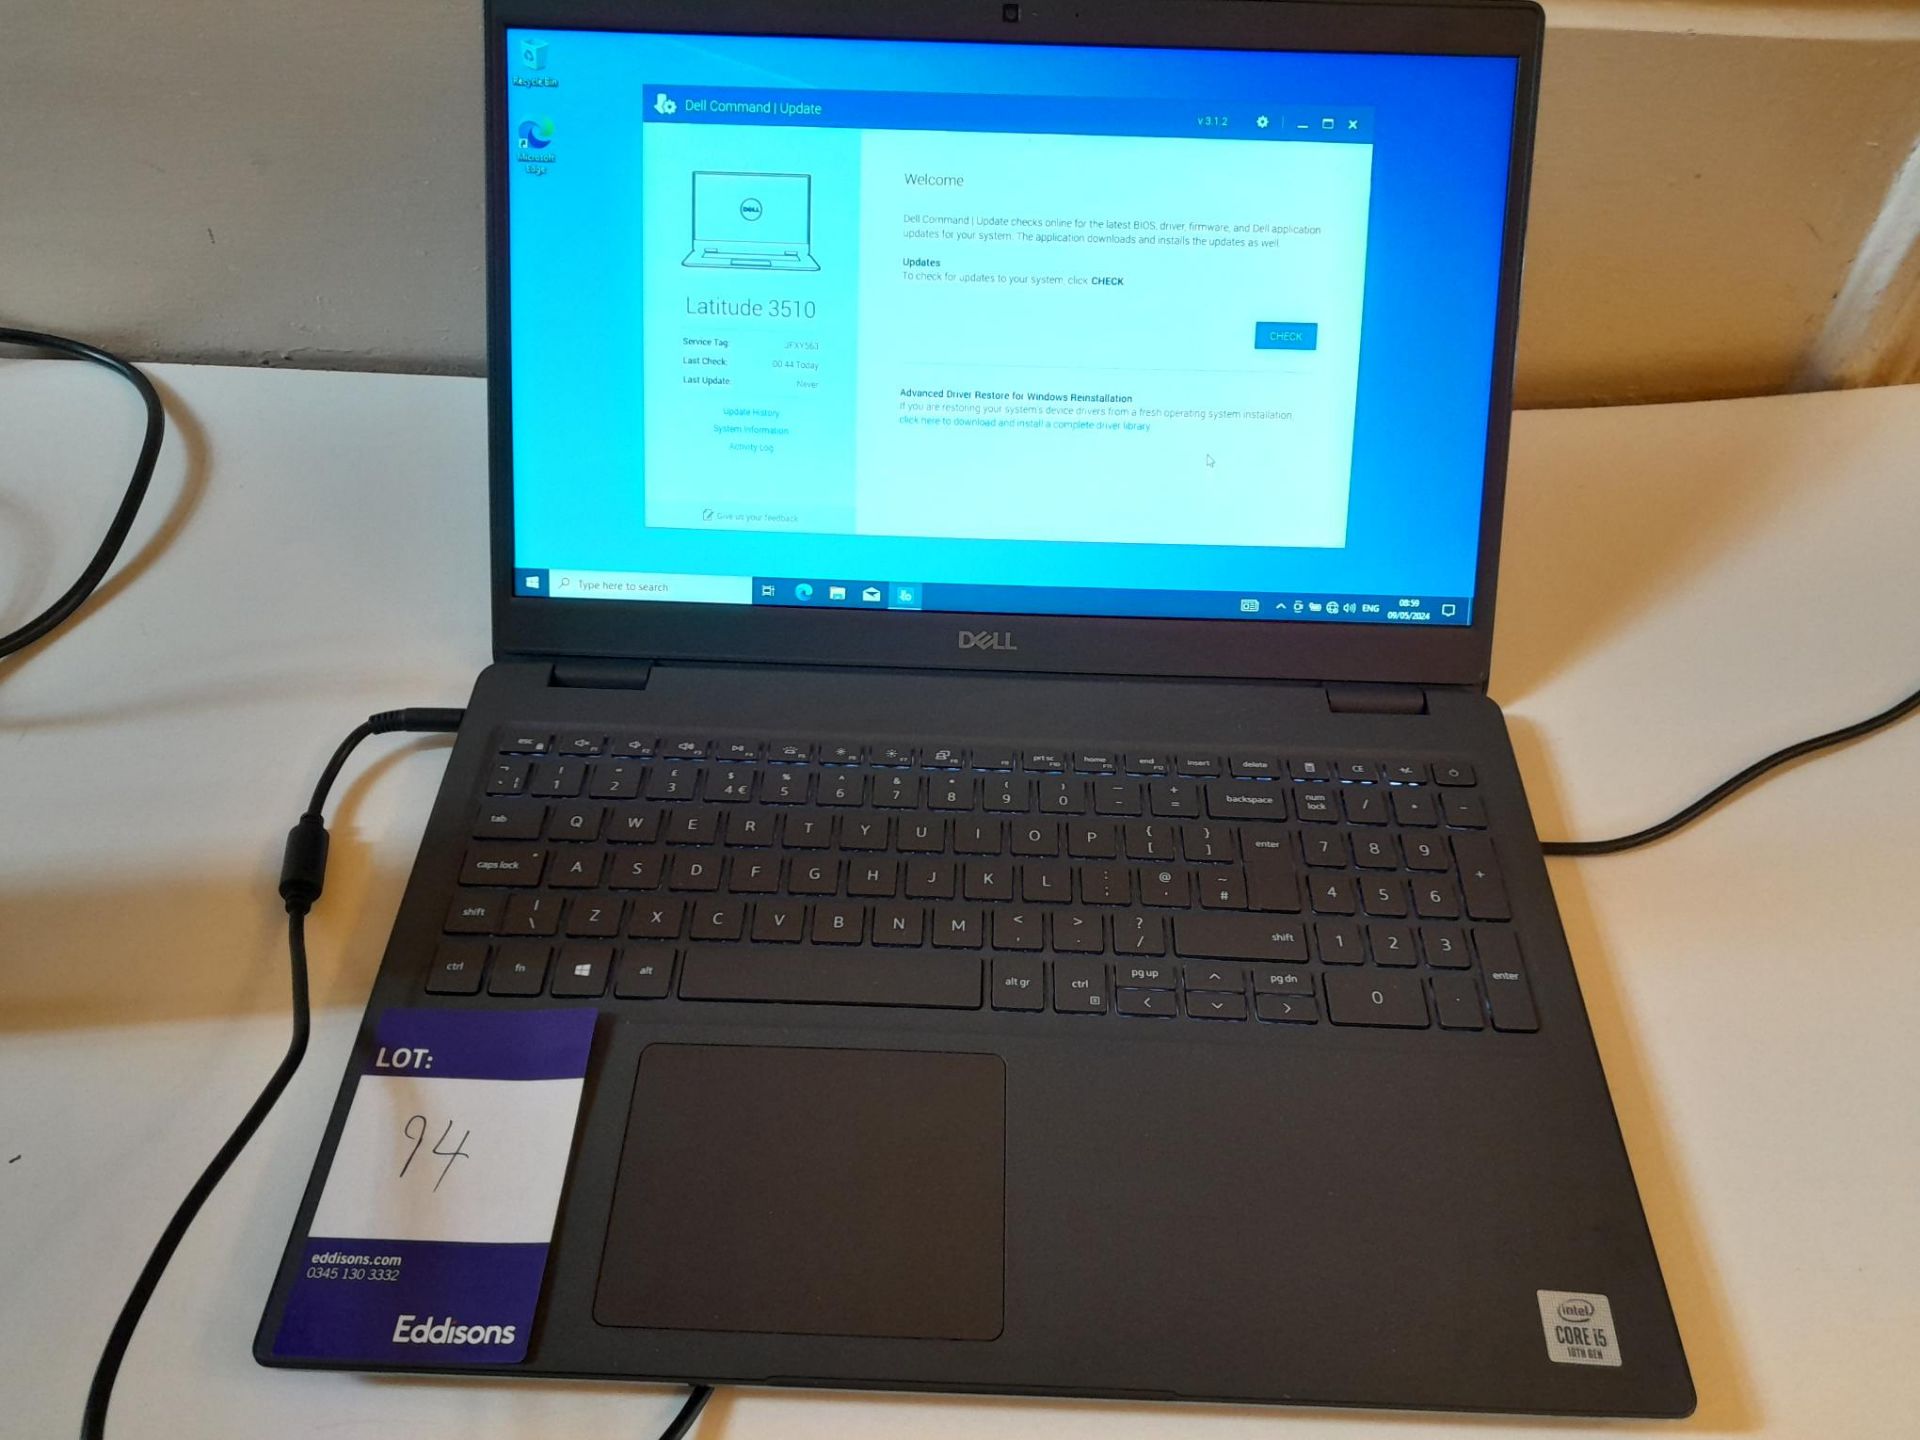 Dell Latitude 3510 Intel Core i5-1021, 8GB RAM, 1TB HDD, Windows 10 Pro Laptop with charger (located